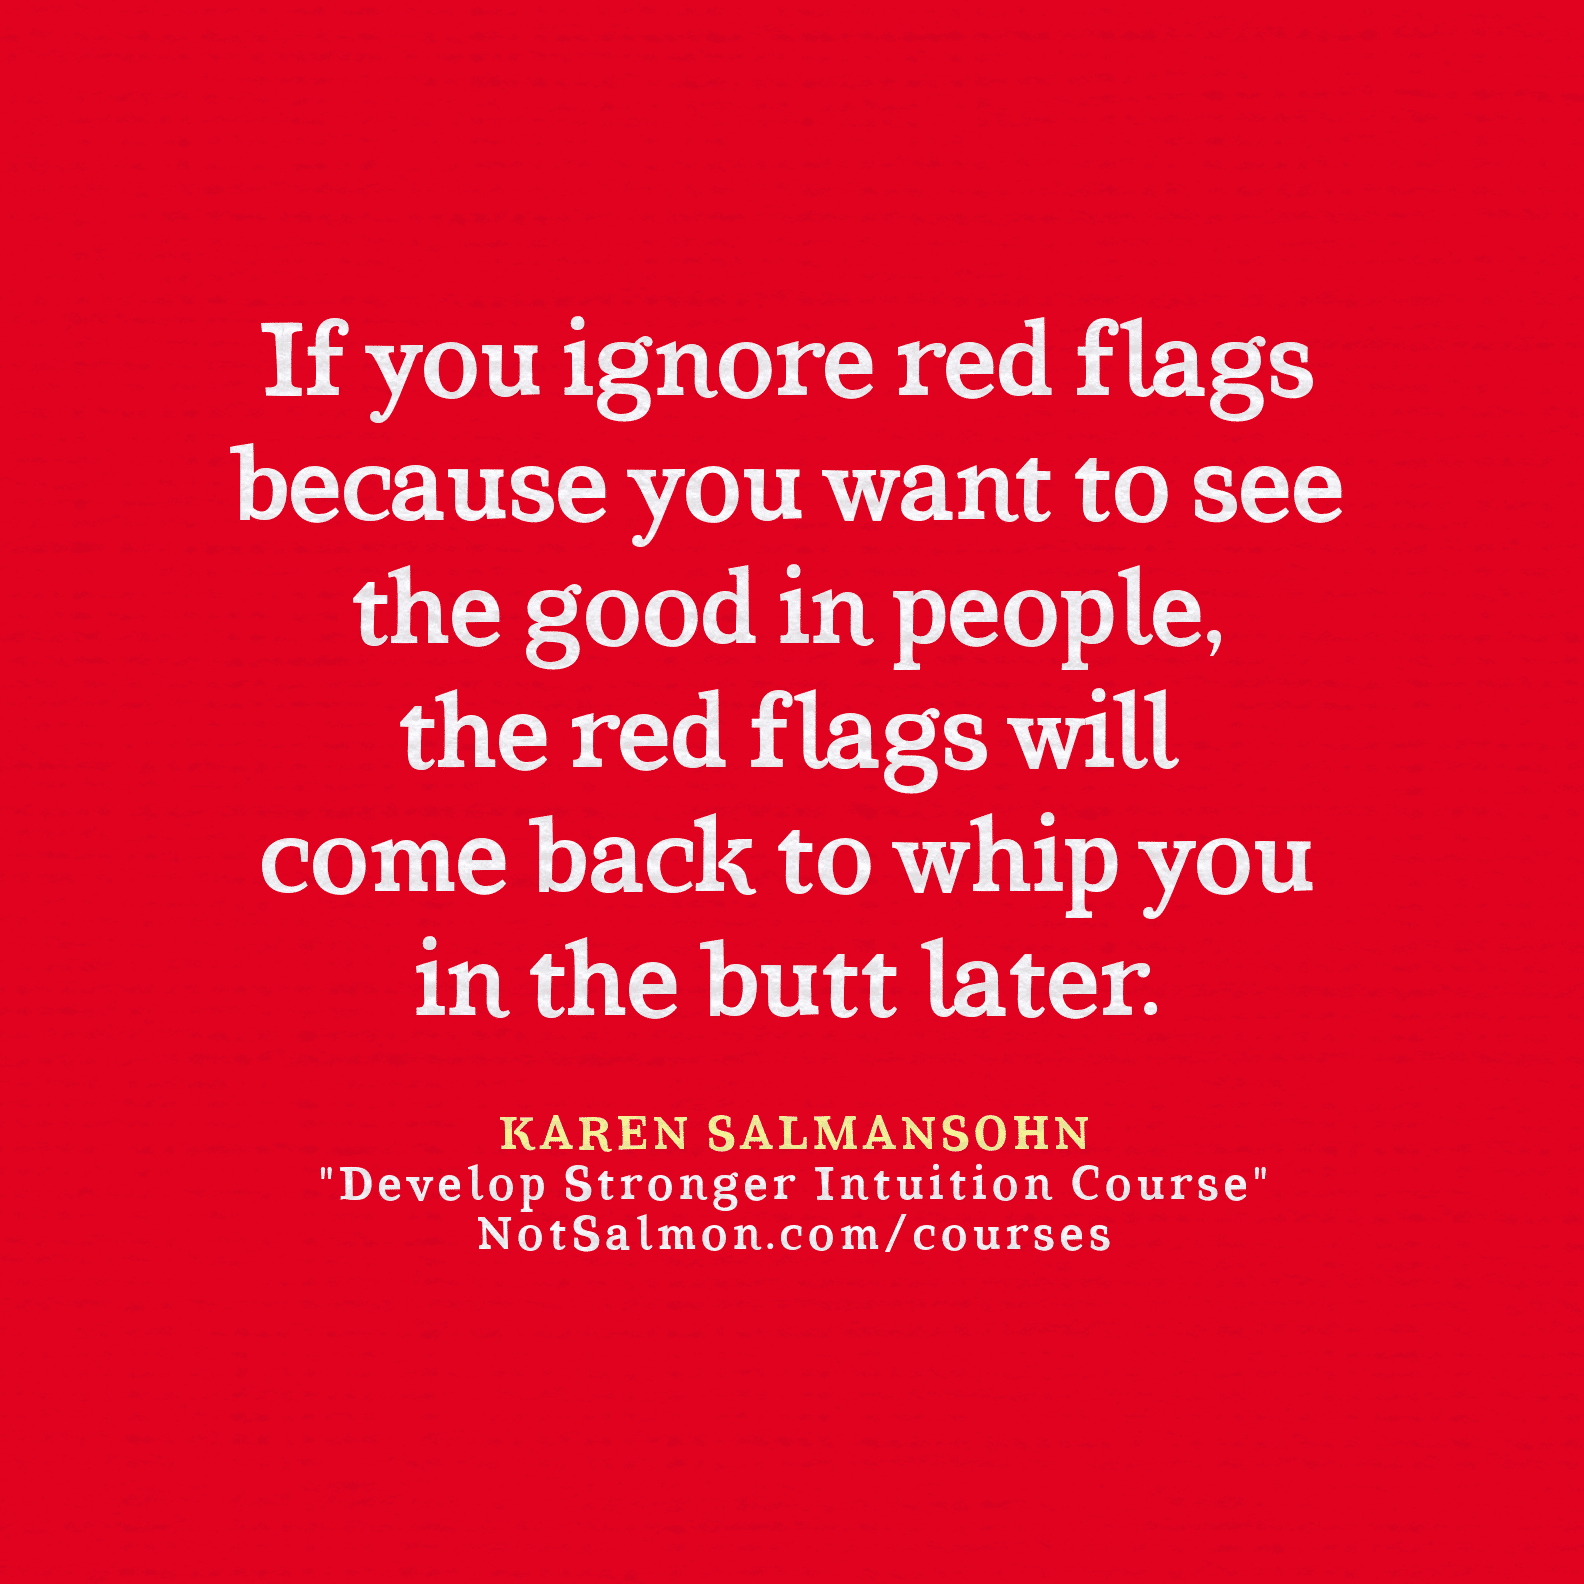 quote ignore red flags kick butt later